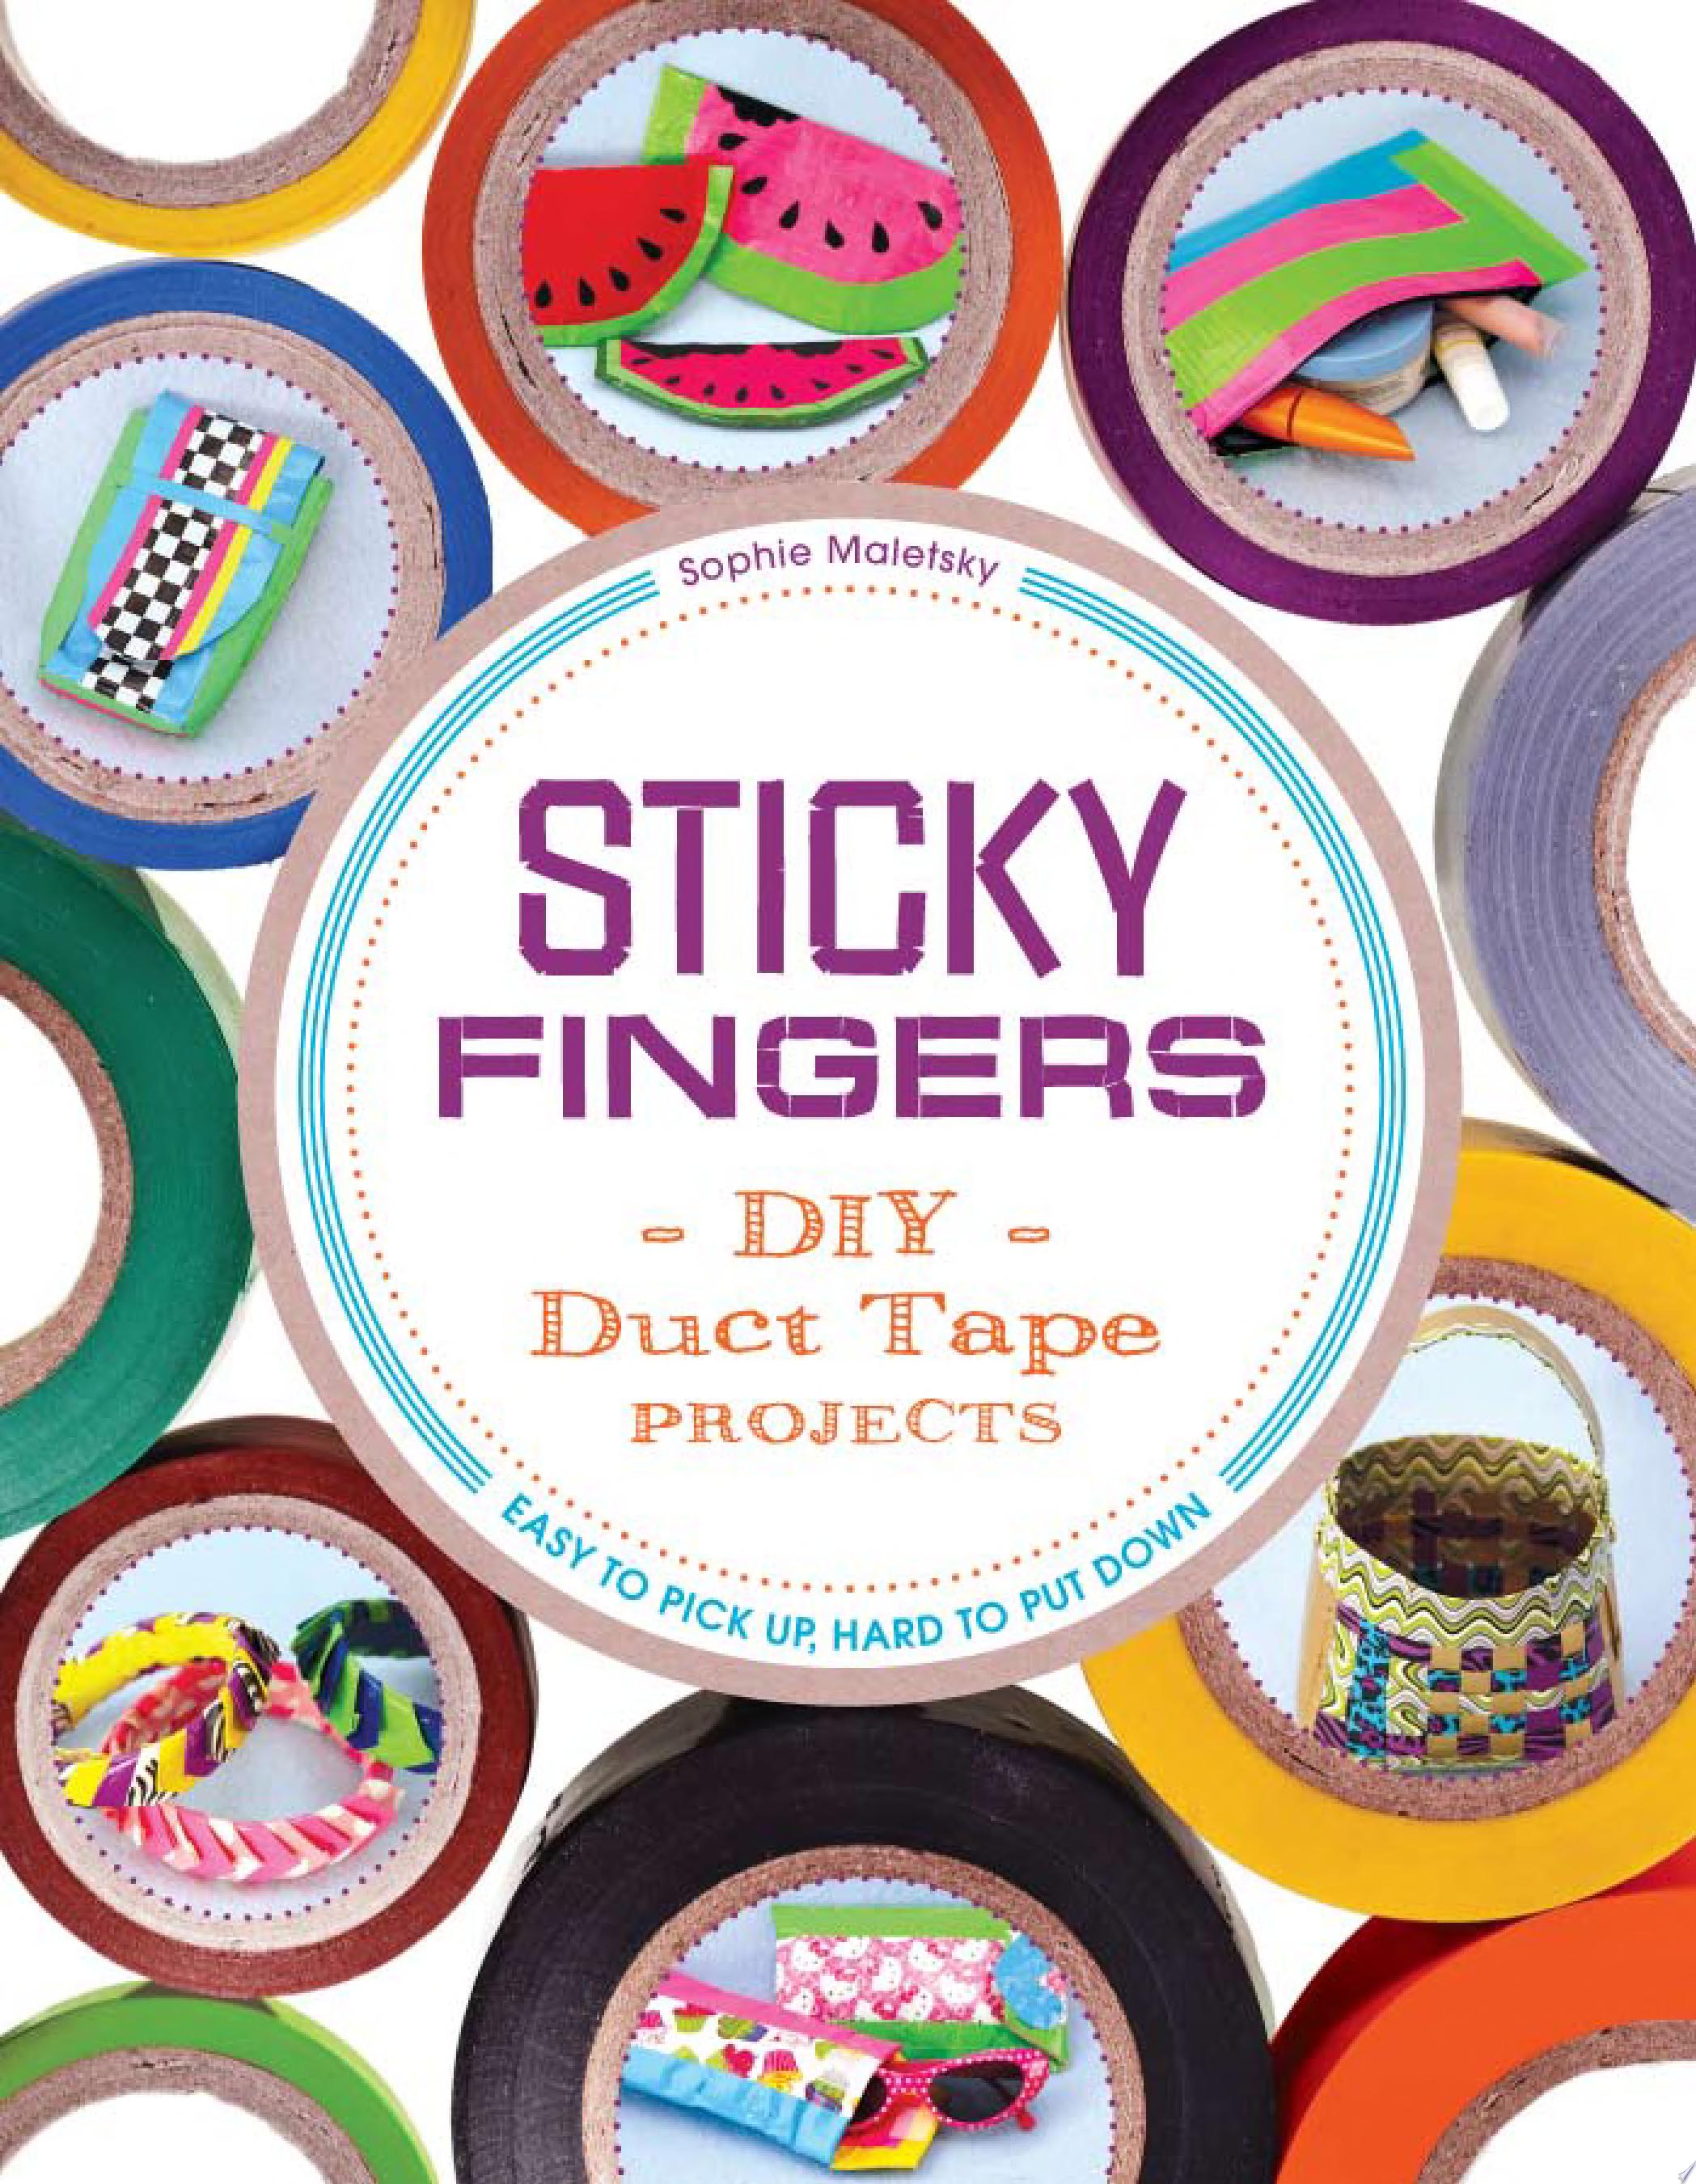 Image for "Sticky Fingers"